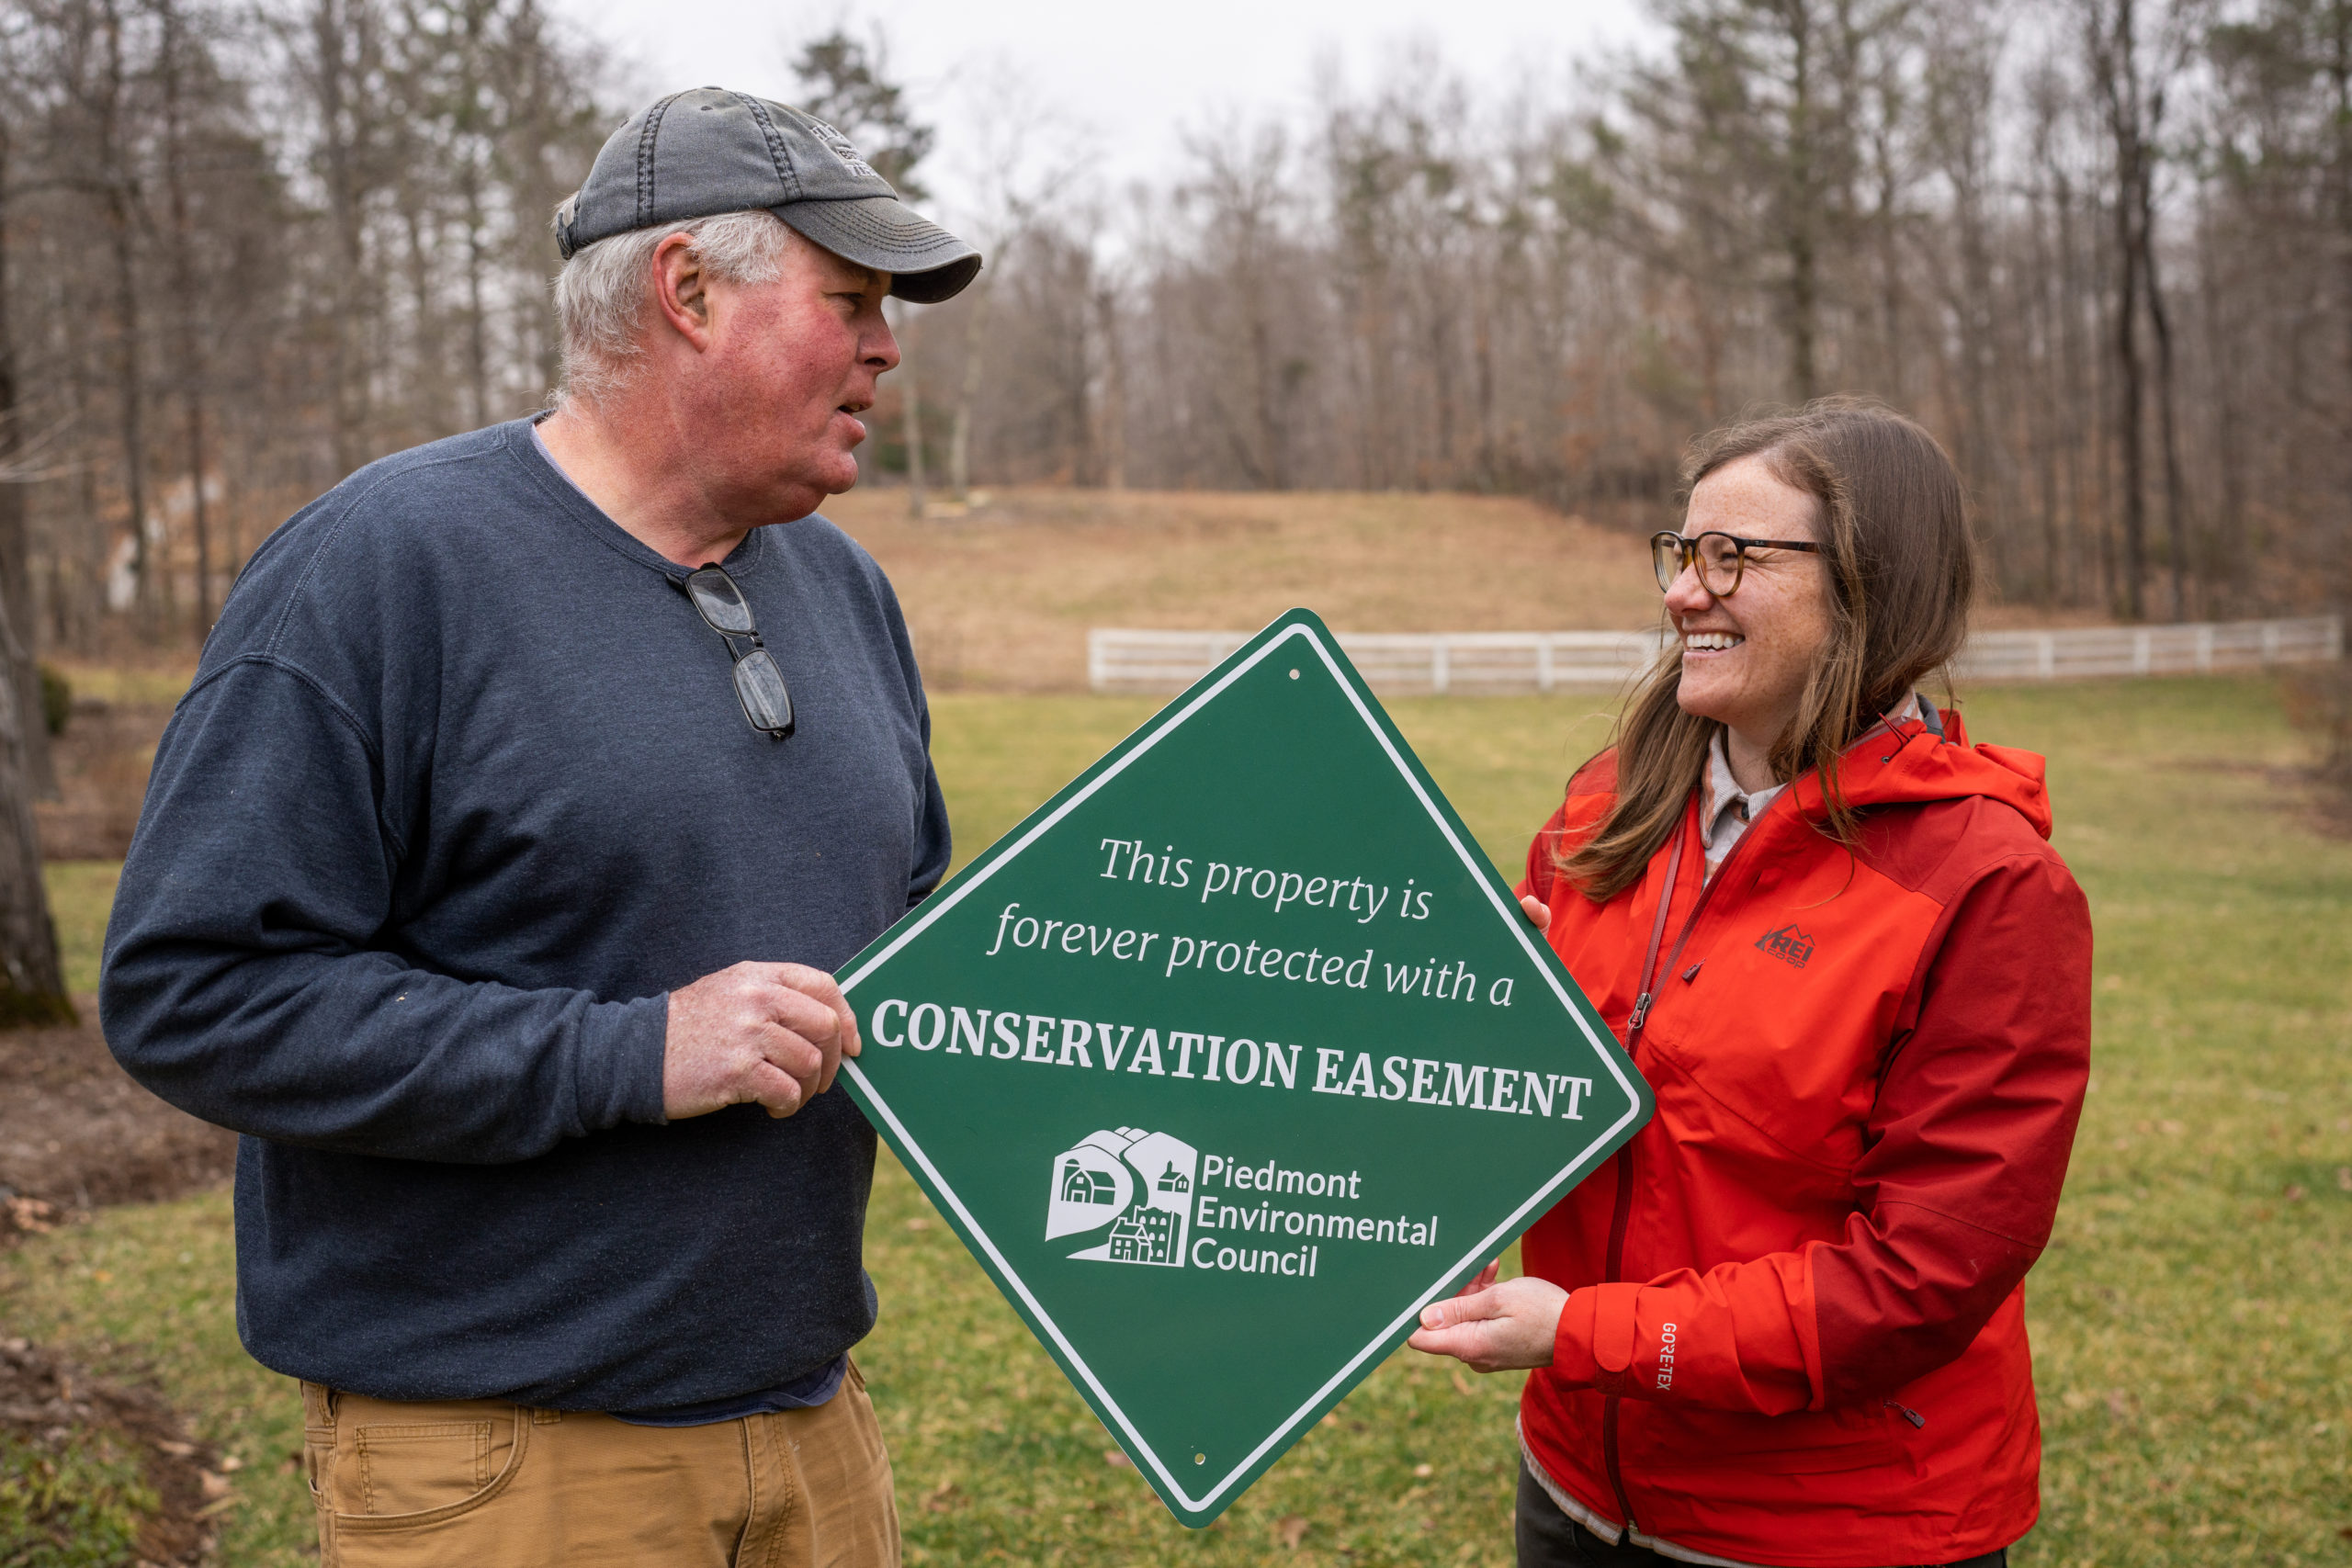 a man and women hold a green sign between them that says "This property is forever protected with a conservation easement"